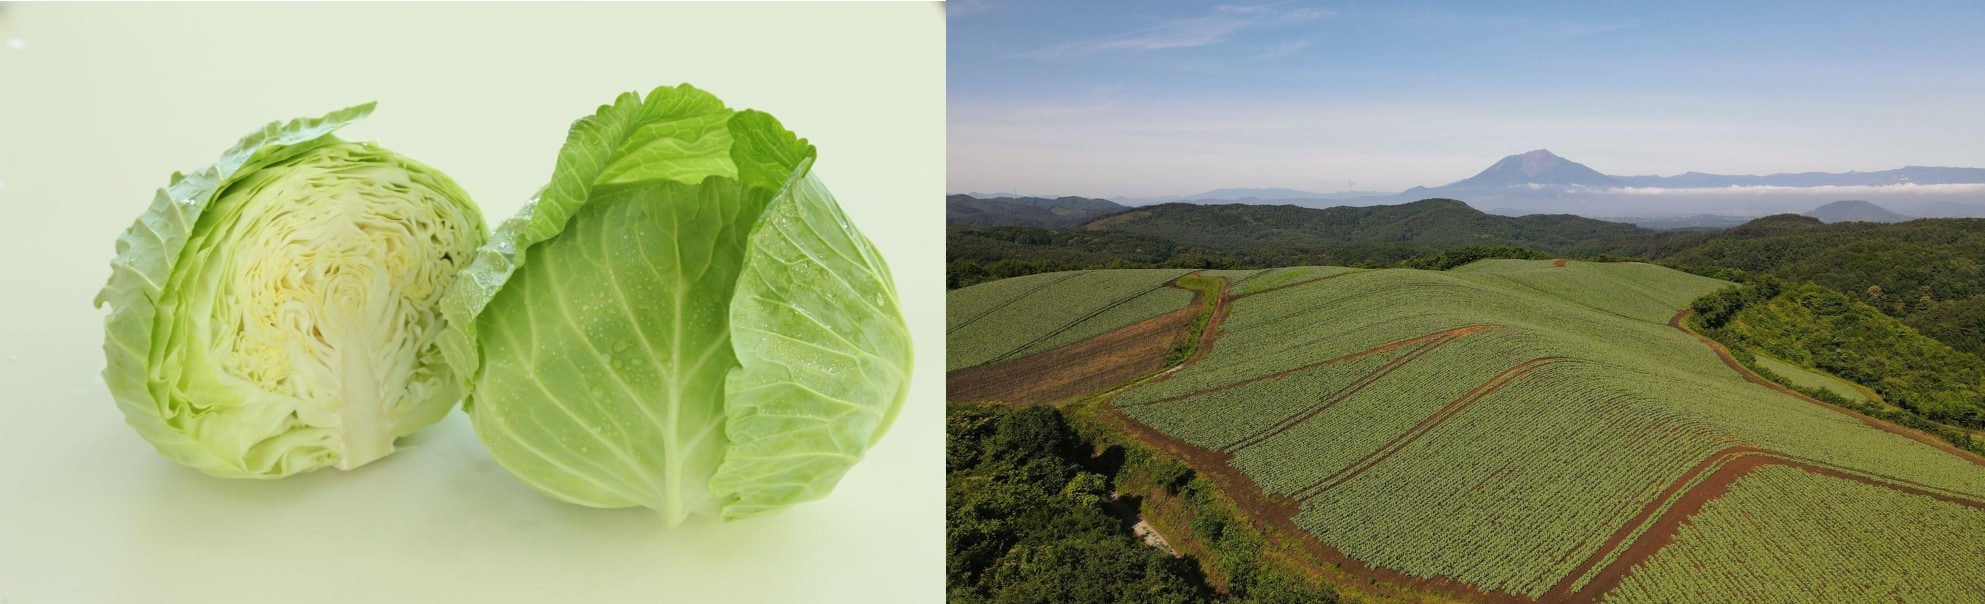 Cabbage and view